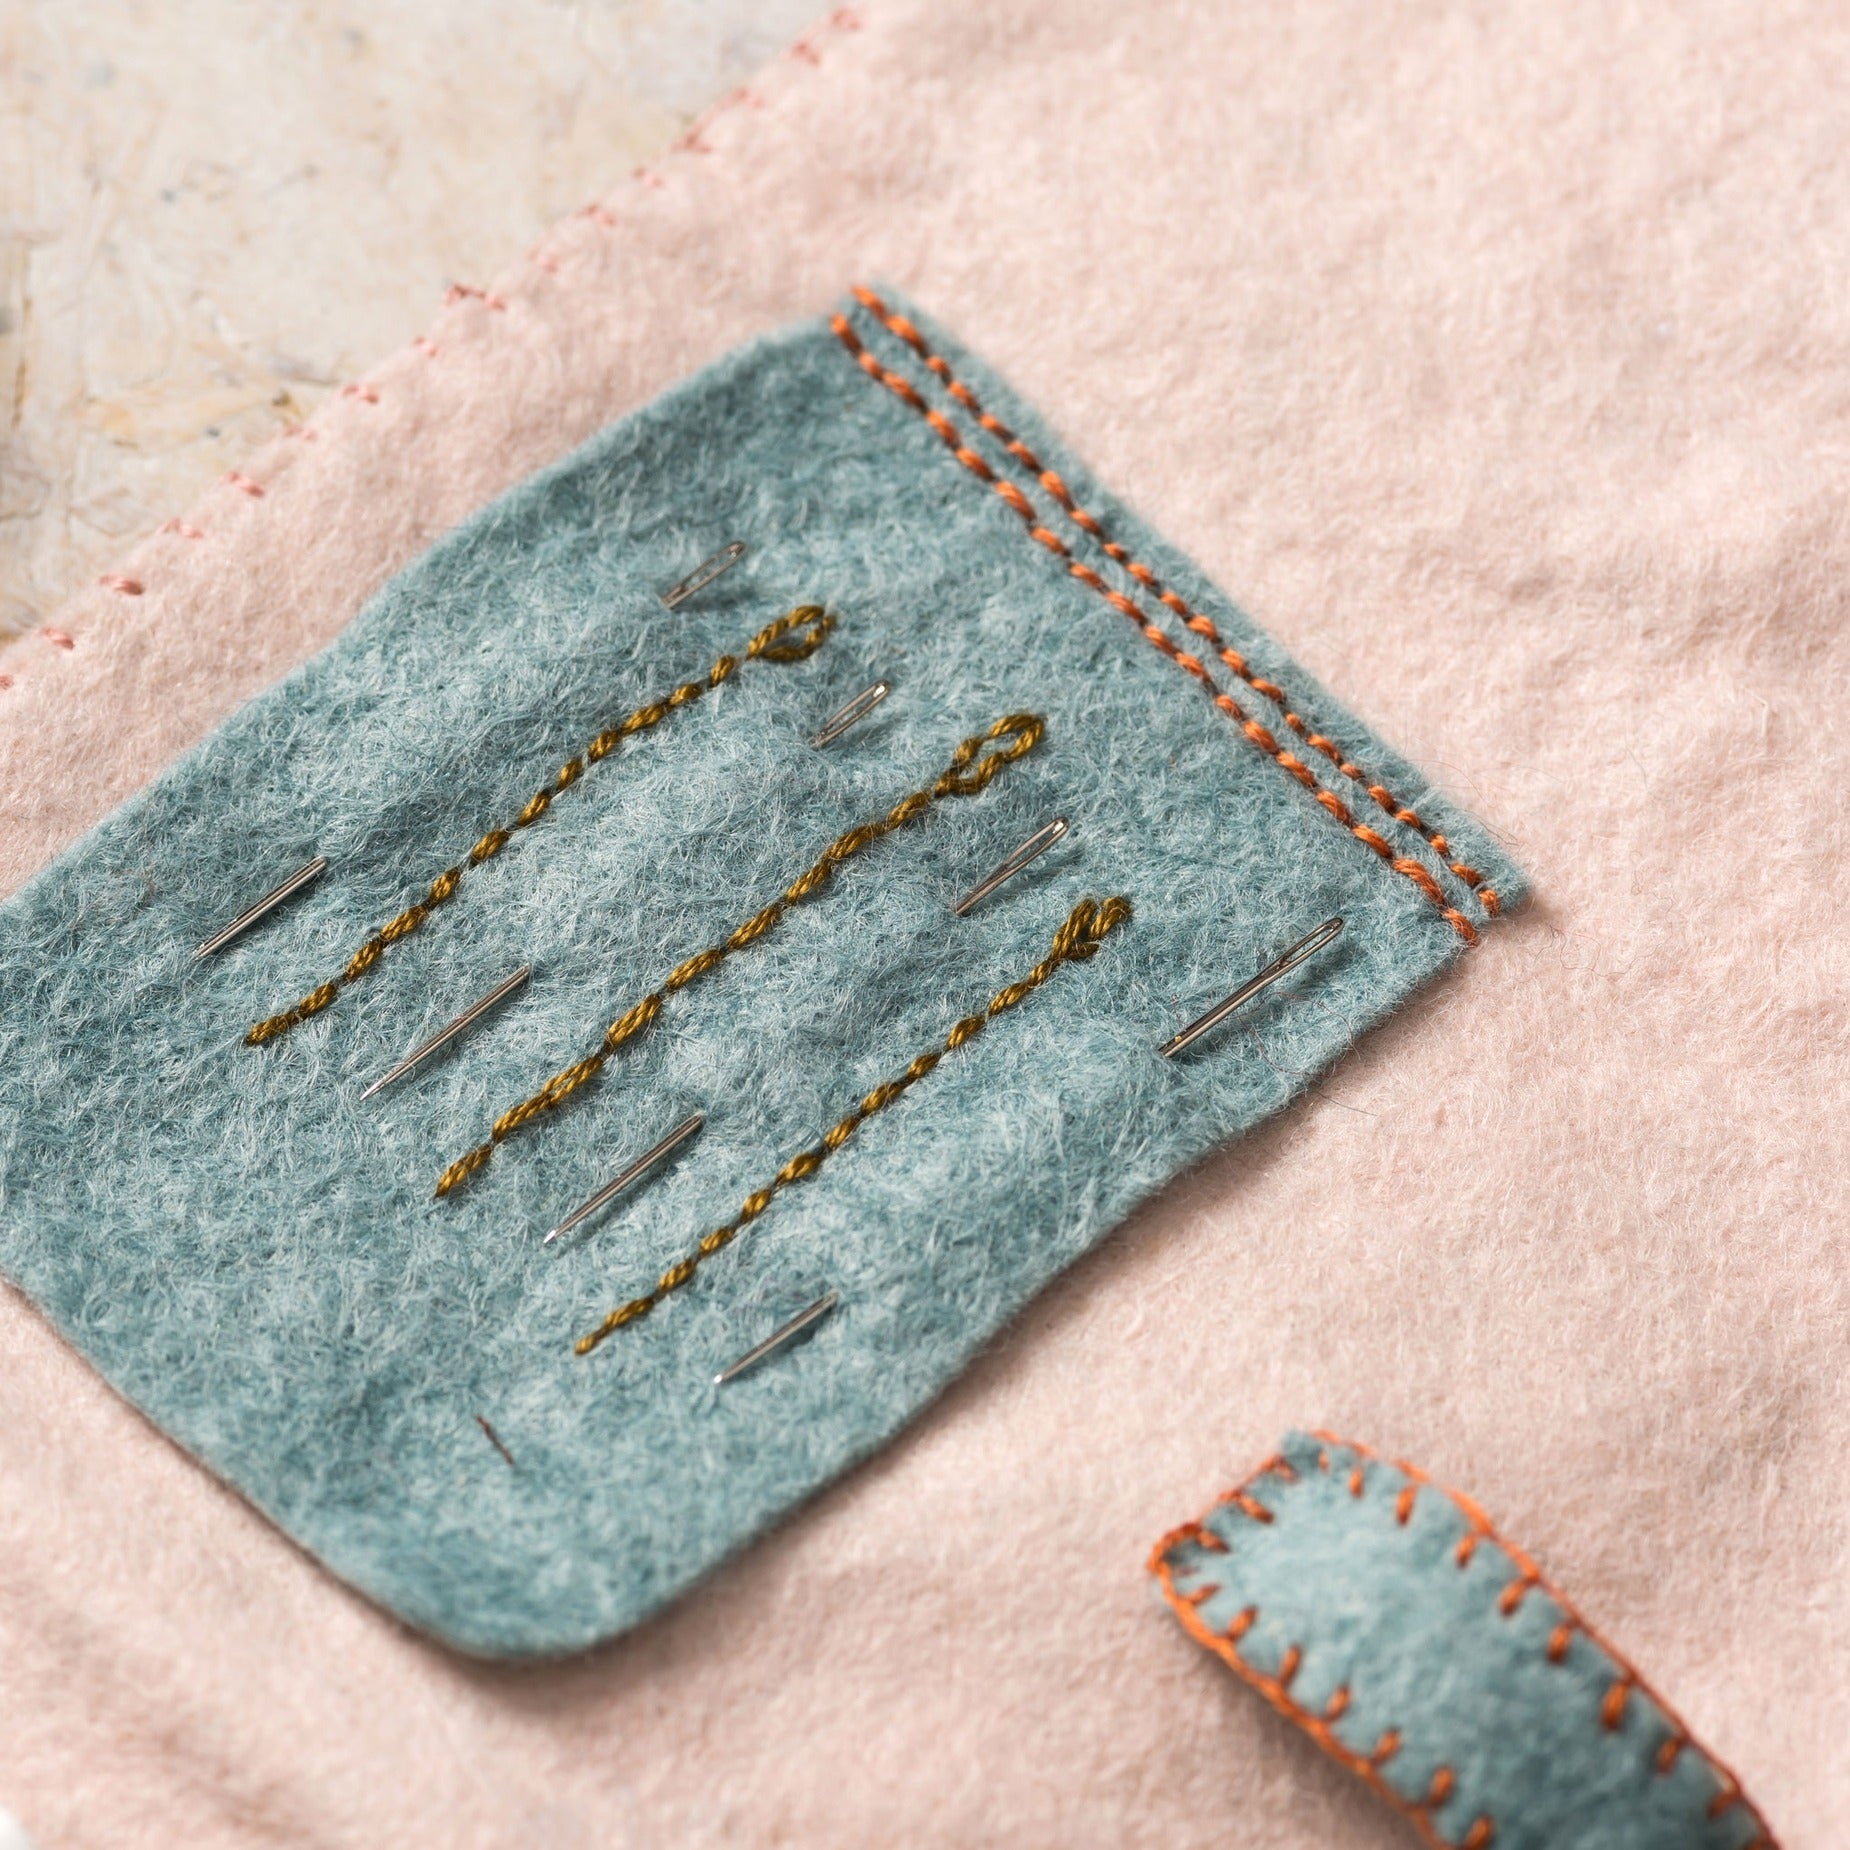 Close-up of a teal felt sewing pocket with intricately stitched orange borders, holding an array of gold-threaded needles, set against a soft pink felt backdrop.